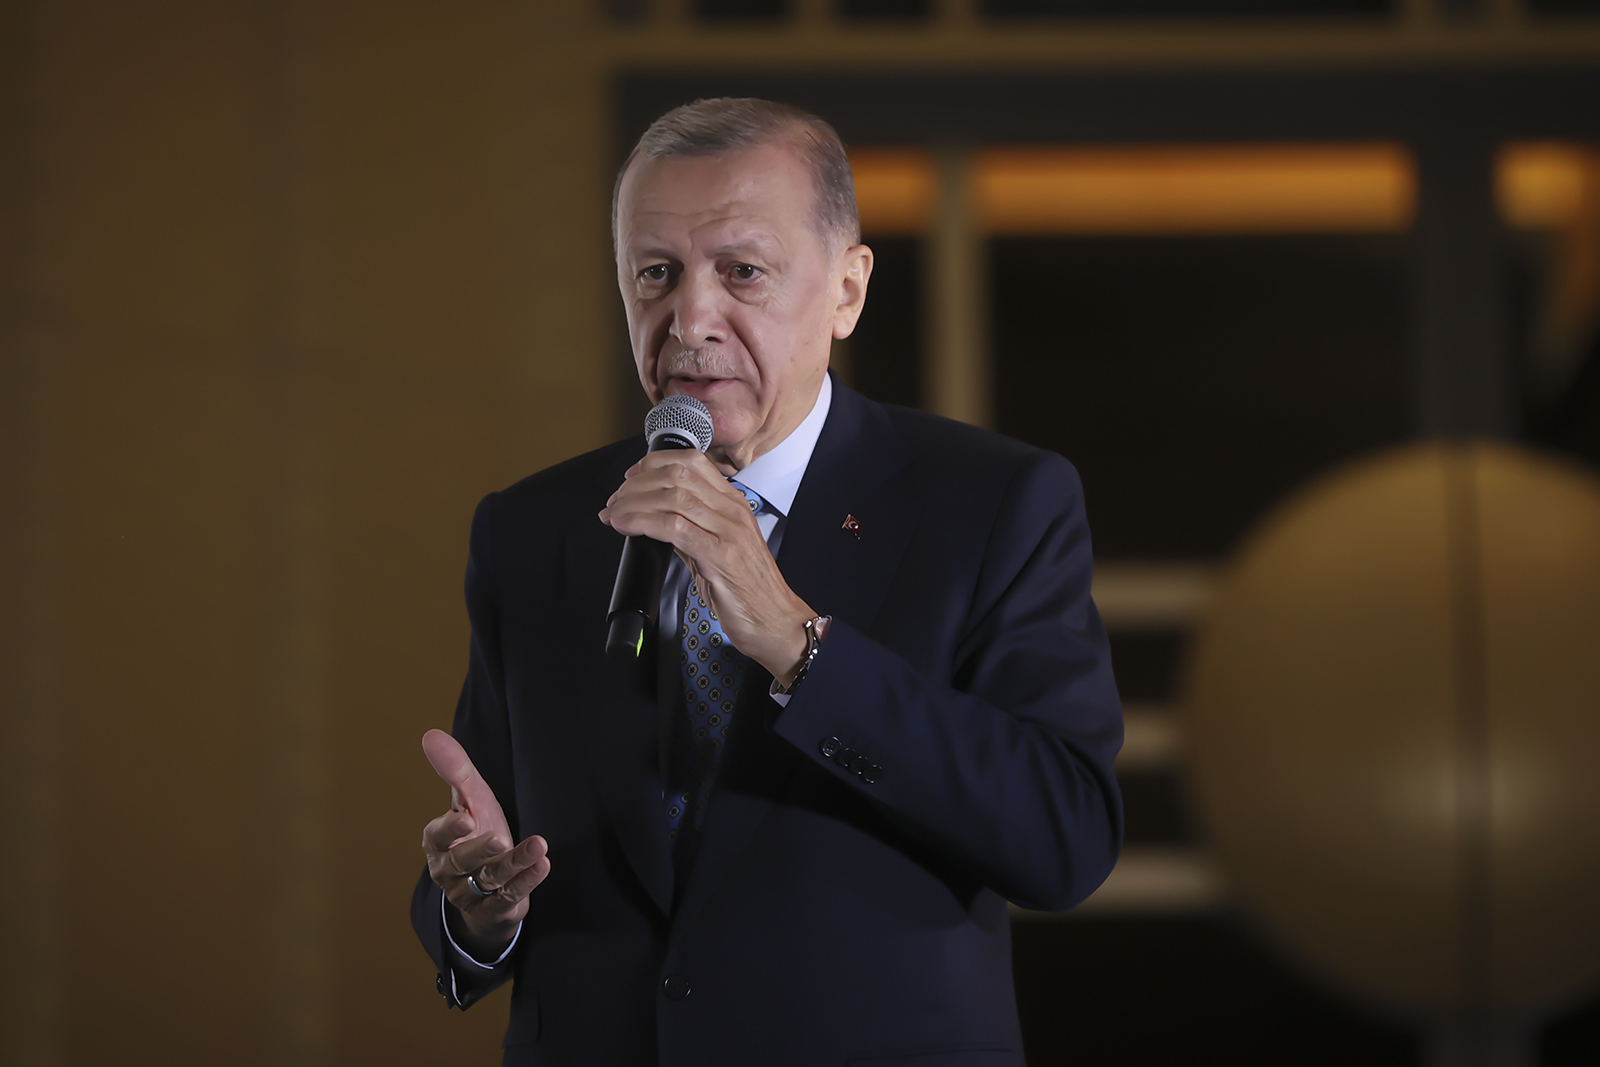 Recep Tayyip Erdogan addresses his supporters at the Presidential Complex to celebrate reelection victory in Ankara, Turkey on May 28.